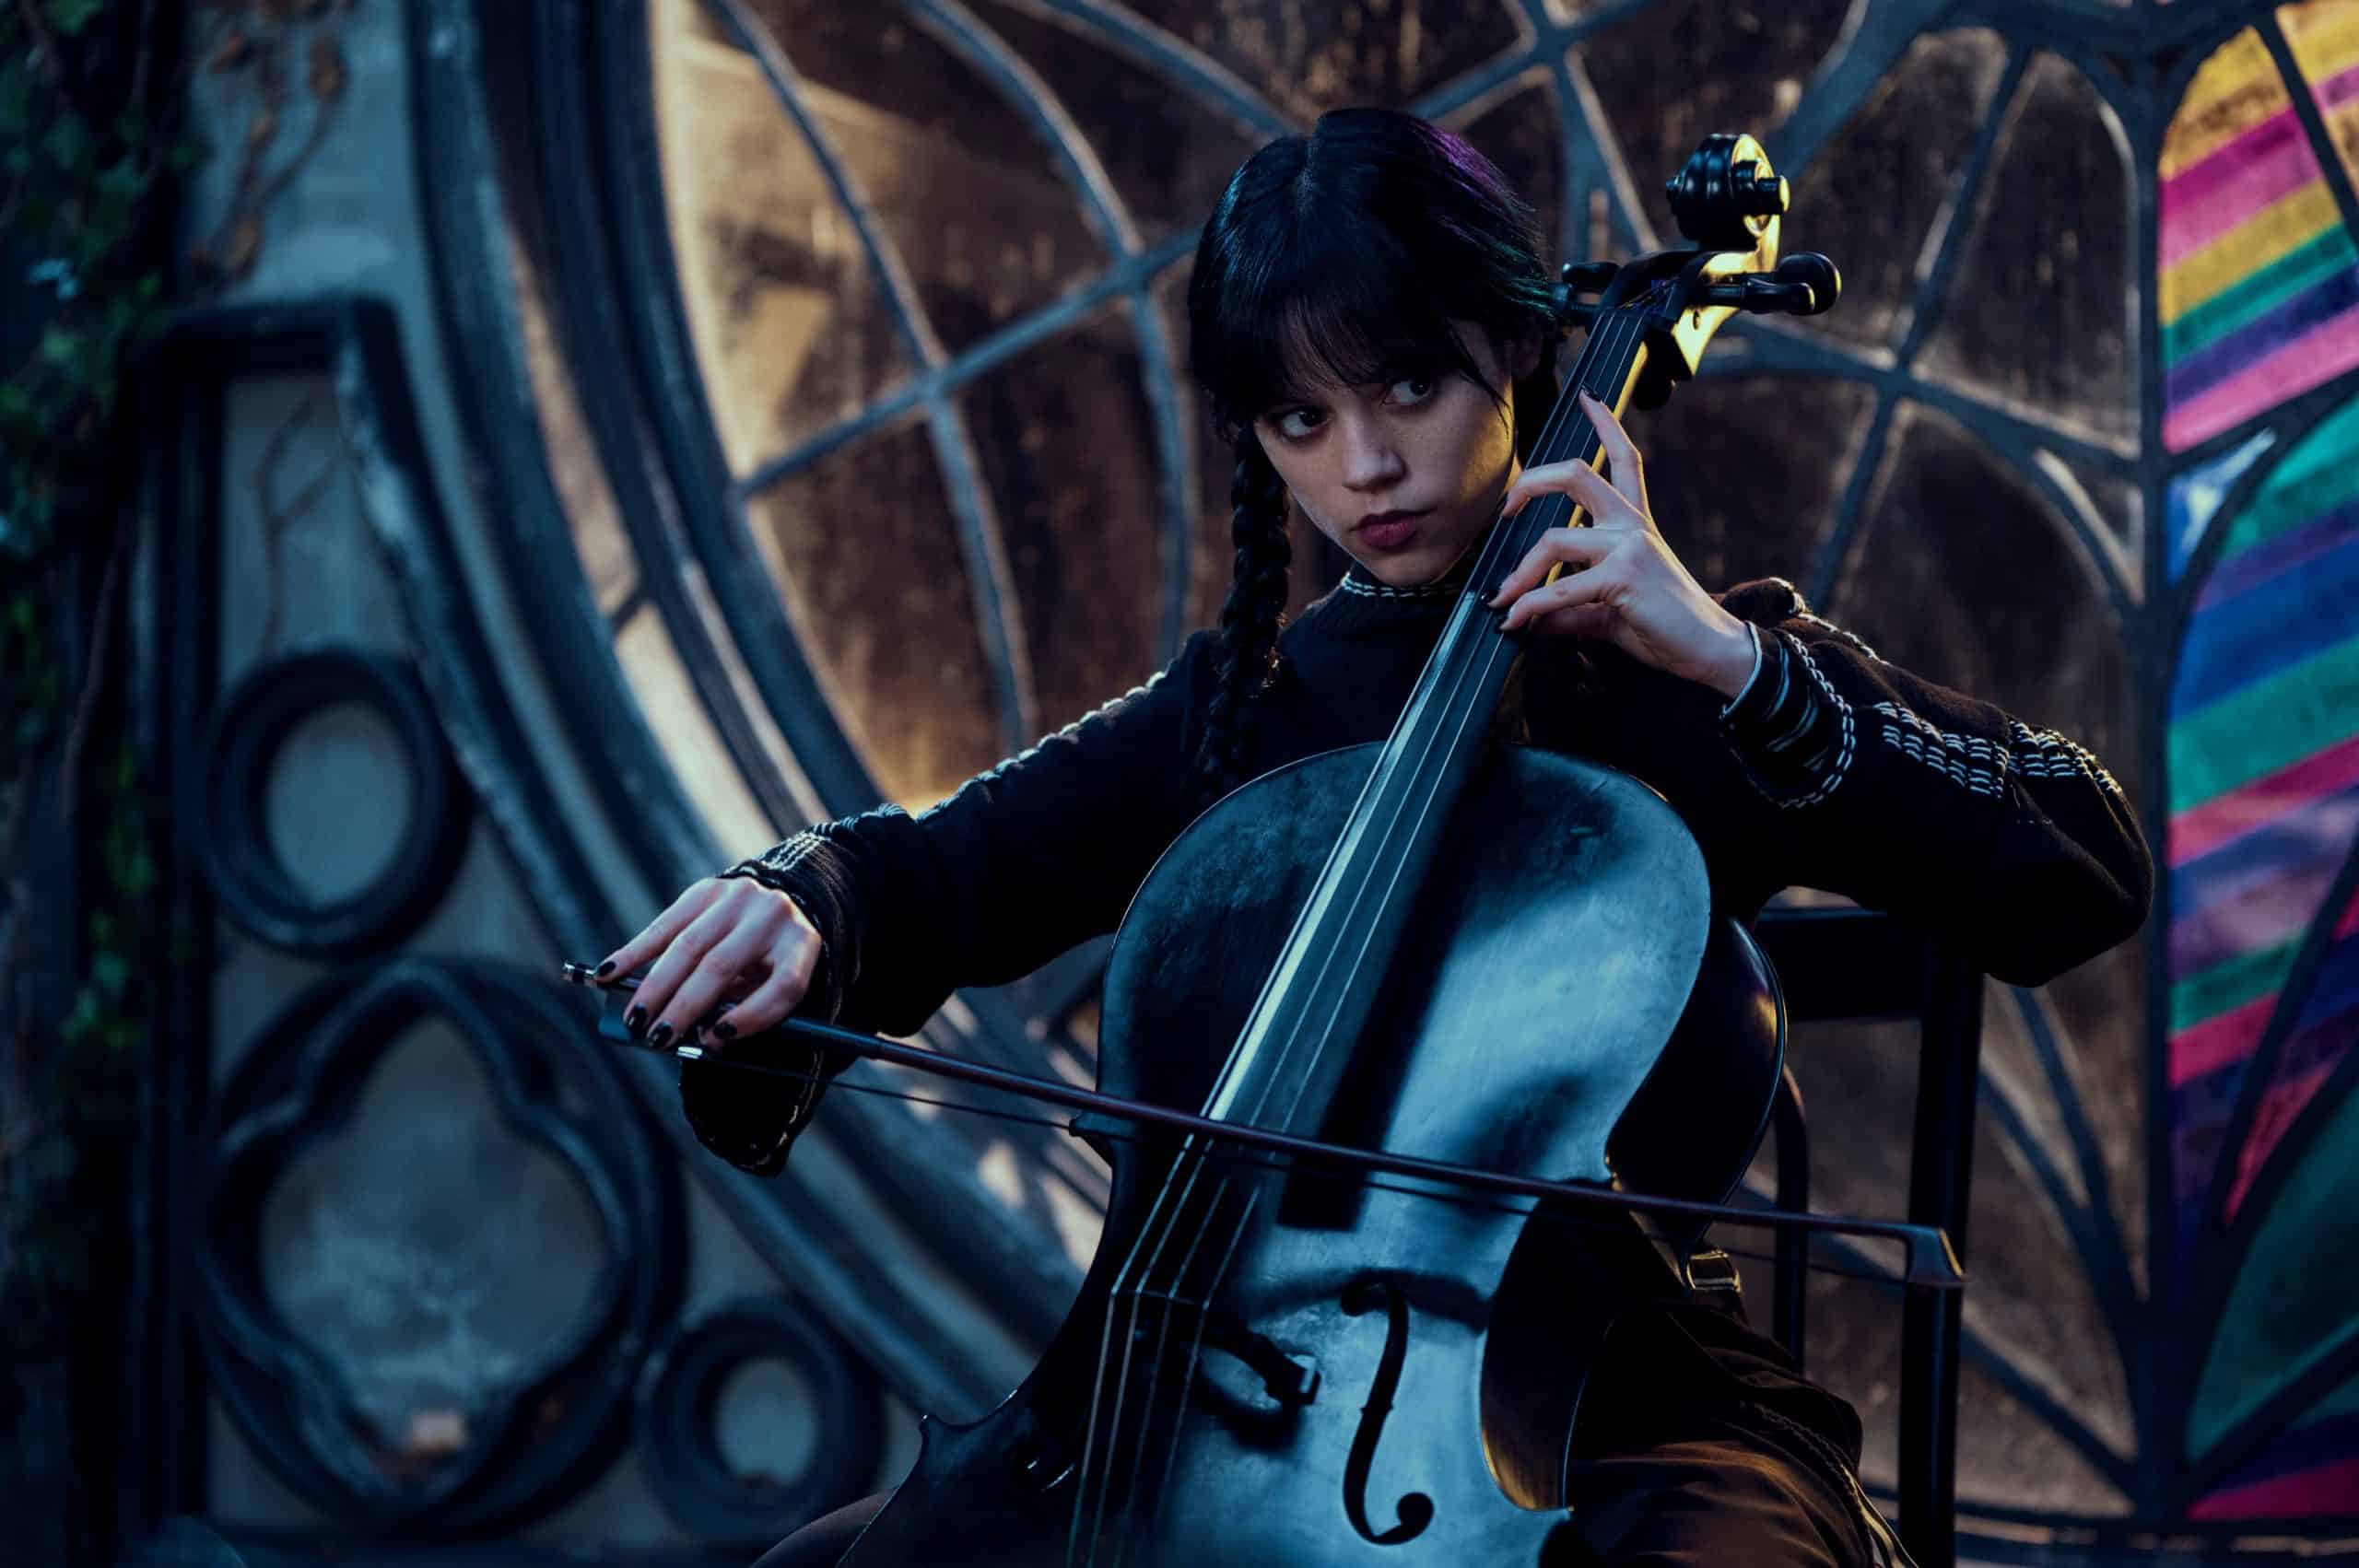 Wednesday playing the cello in "Wednesday"